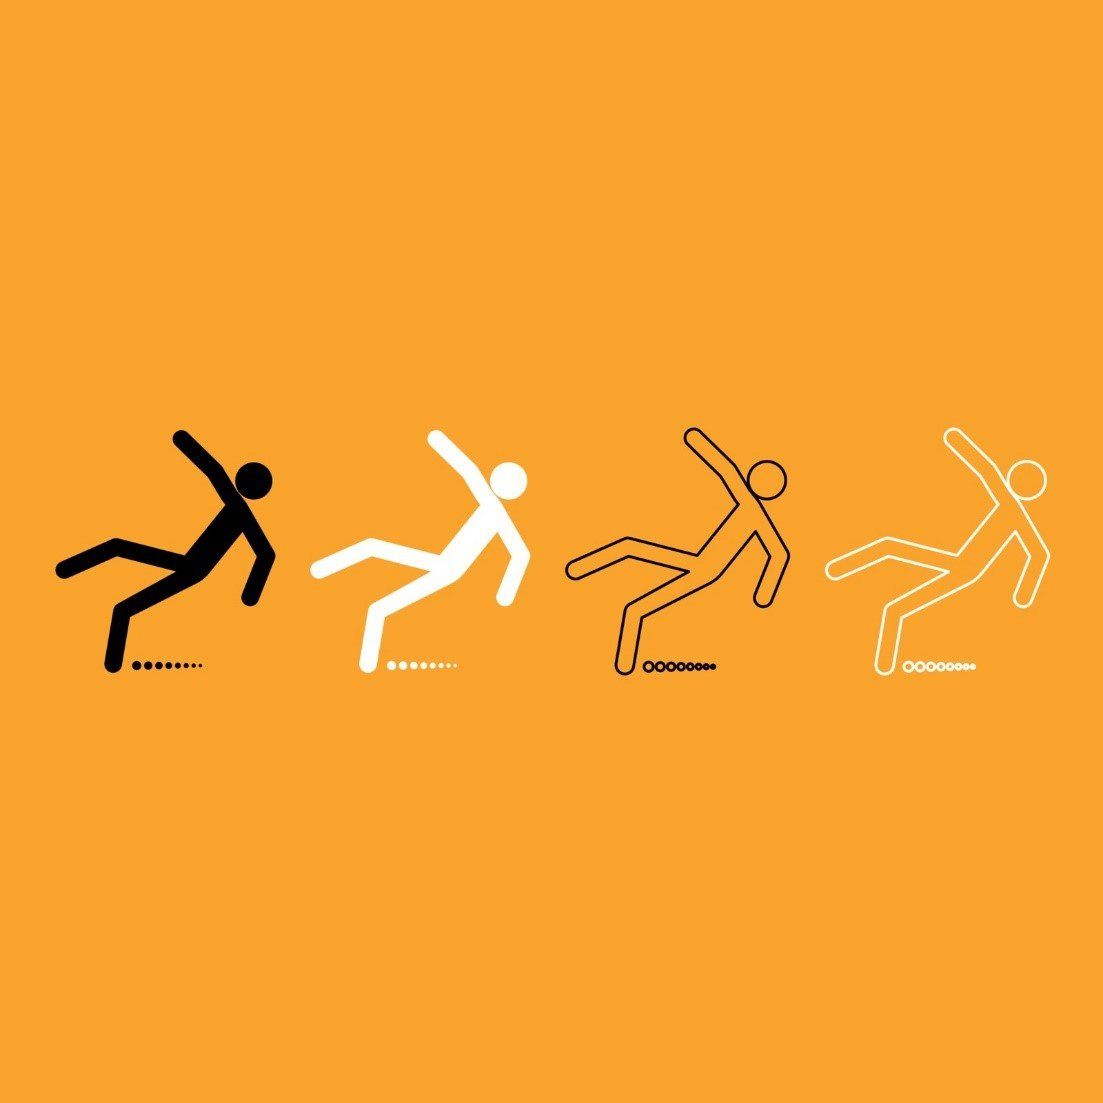 An illustration of a slip and fall concept.